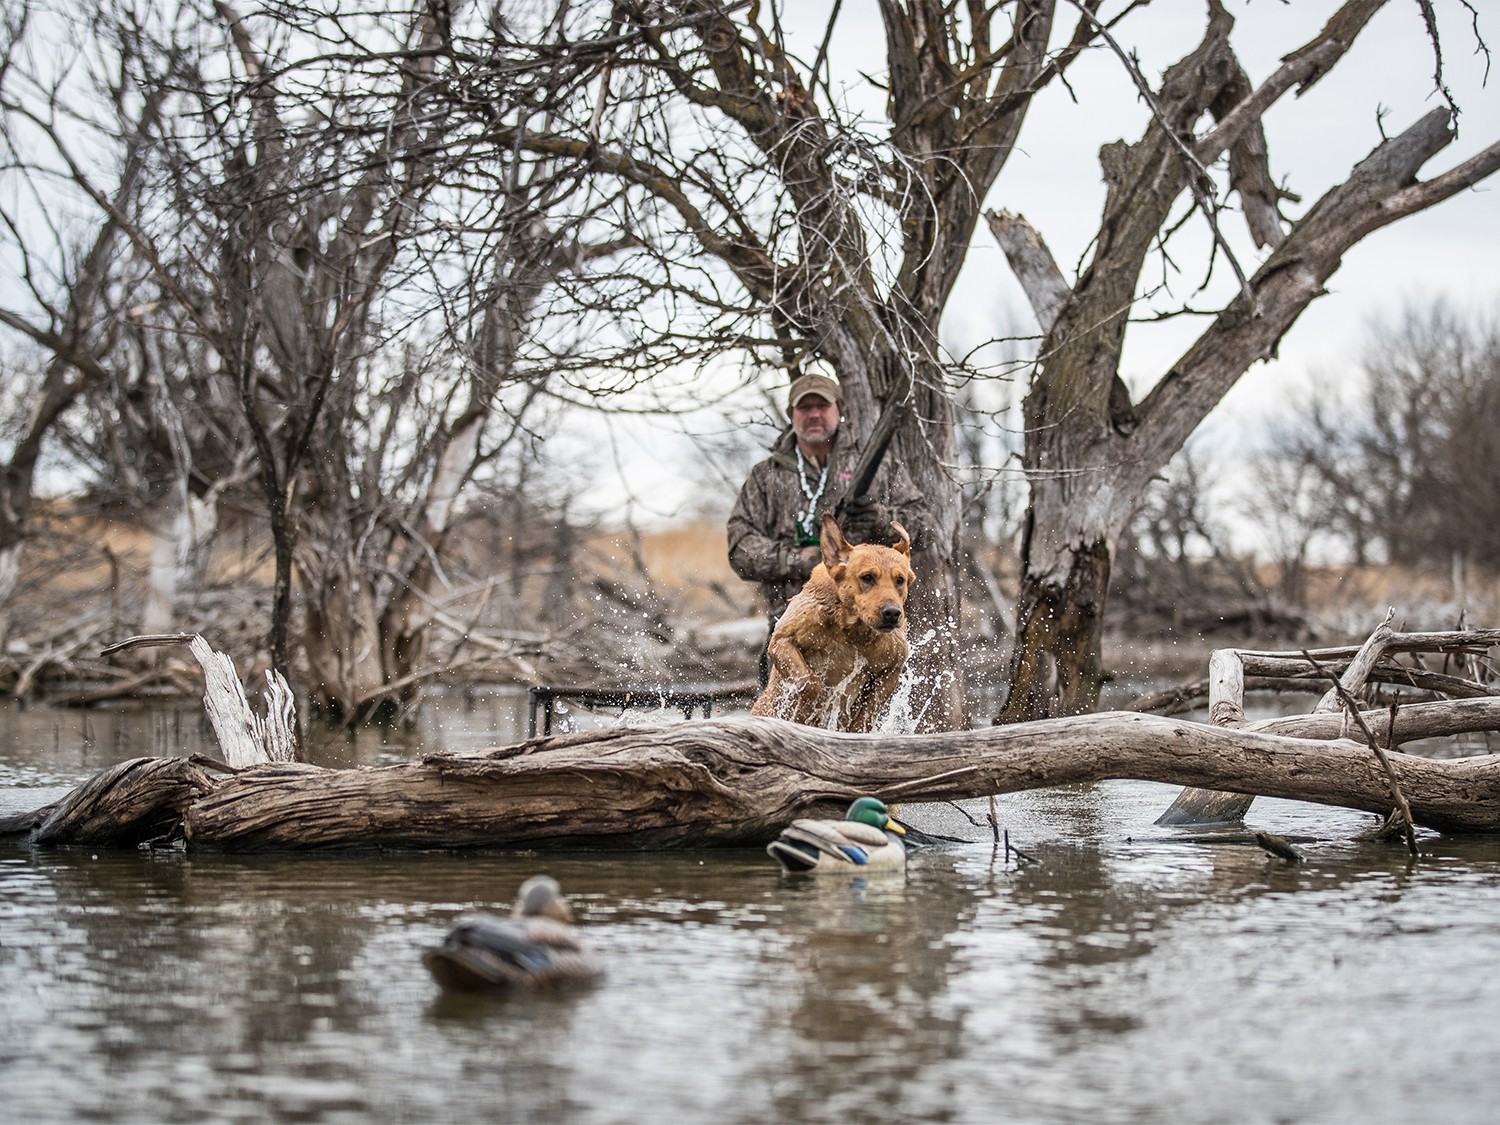 A hunting dog splashes through the water to retrieve a duck.